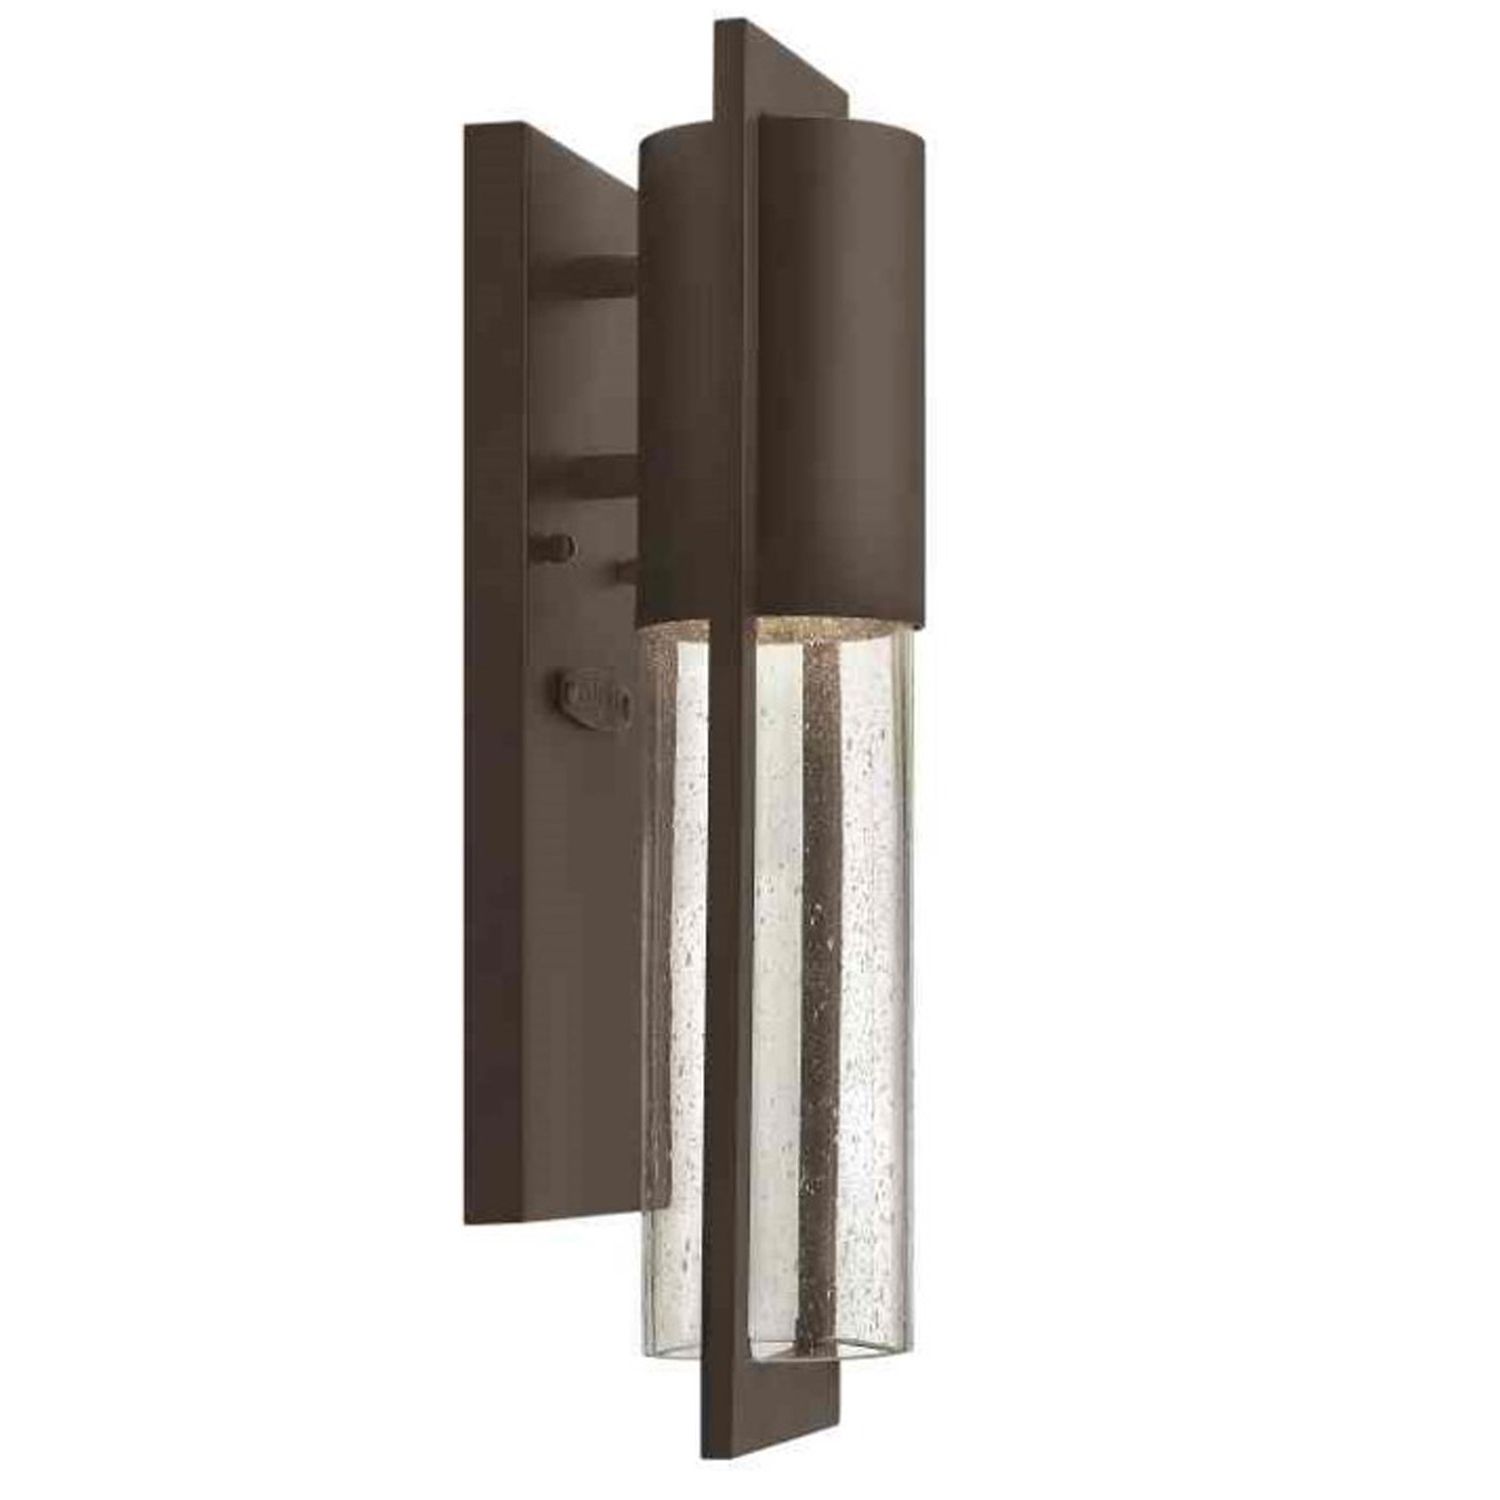 Outdoor Wall Lighting At Wayfair With Regard To Fashionable Hinkley 1326kz Led Dwell Mini 1 Light Led Outdoor Wall Sconce In (View 11 of 20)